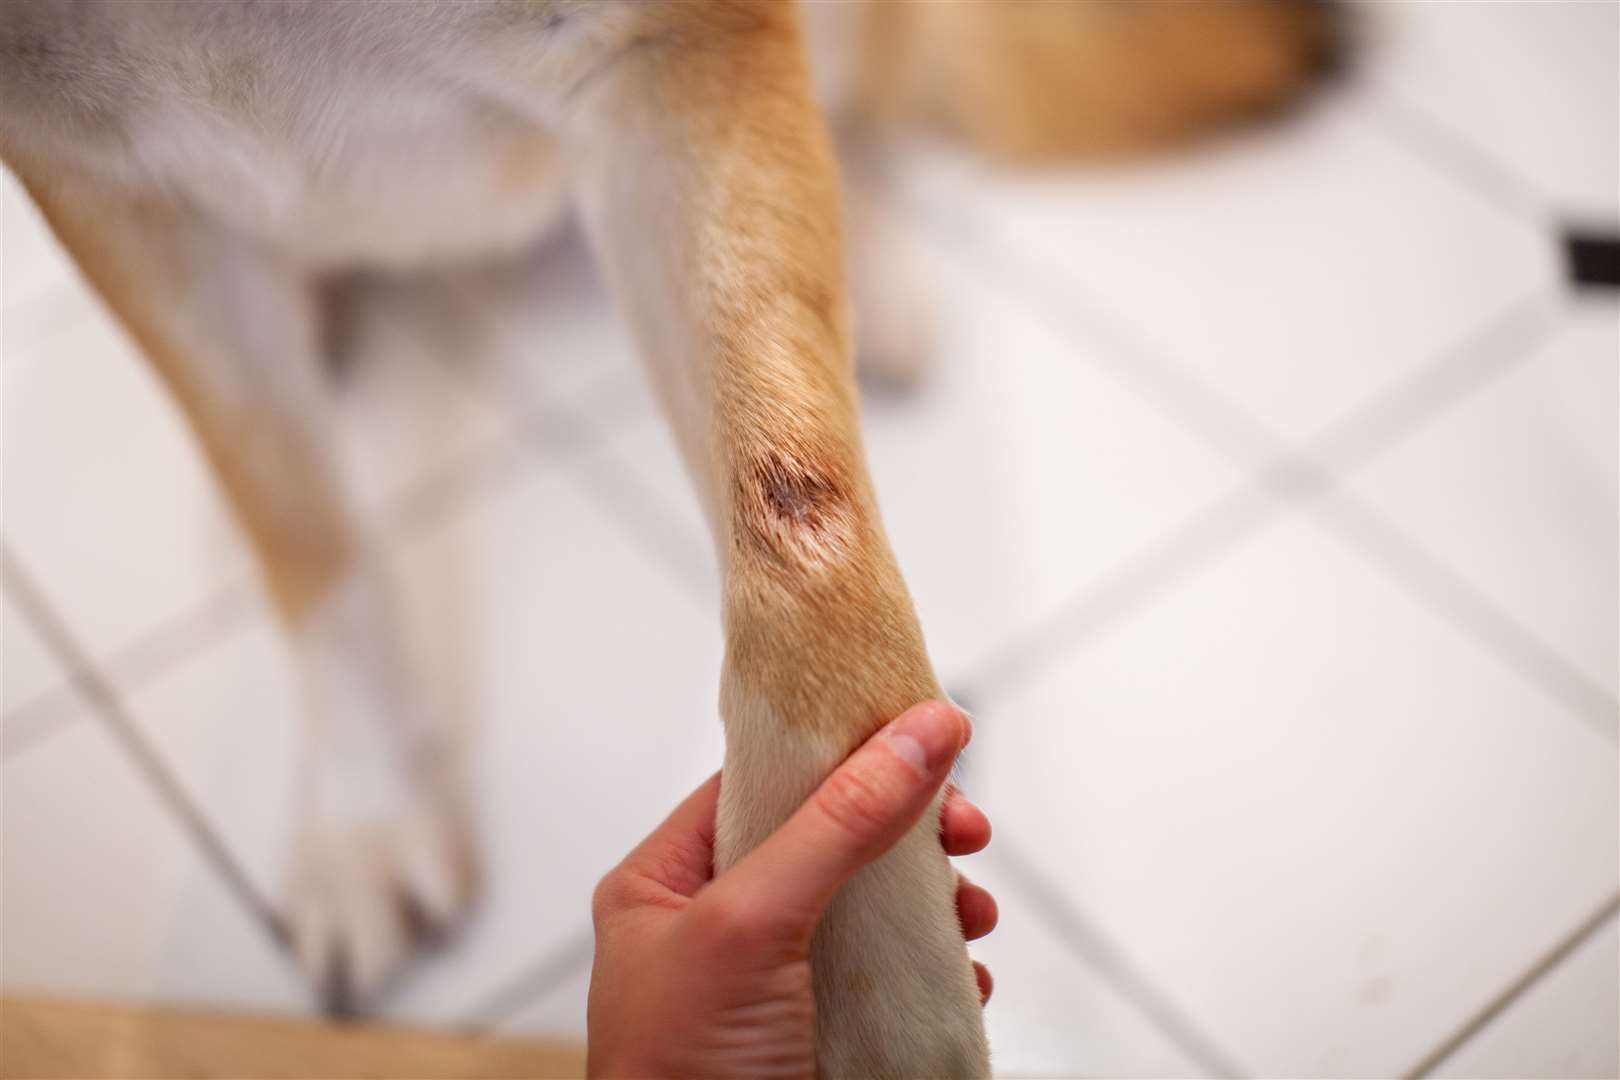 A dog with a painful hot spot on their front paw, that has licked it until it's red, bleeding and raw. Photo: istock/Ashley-Belle Burns